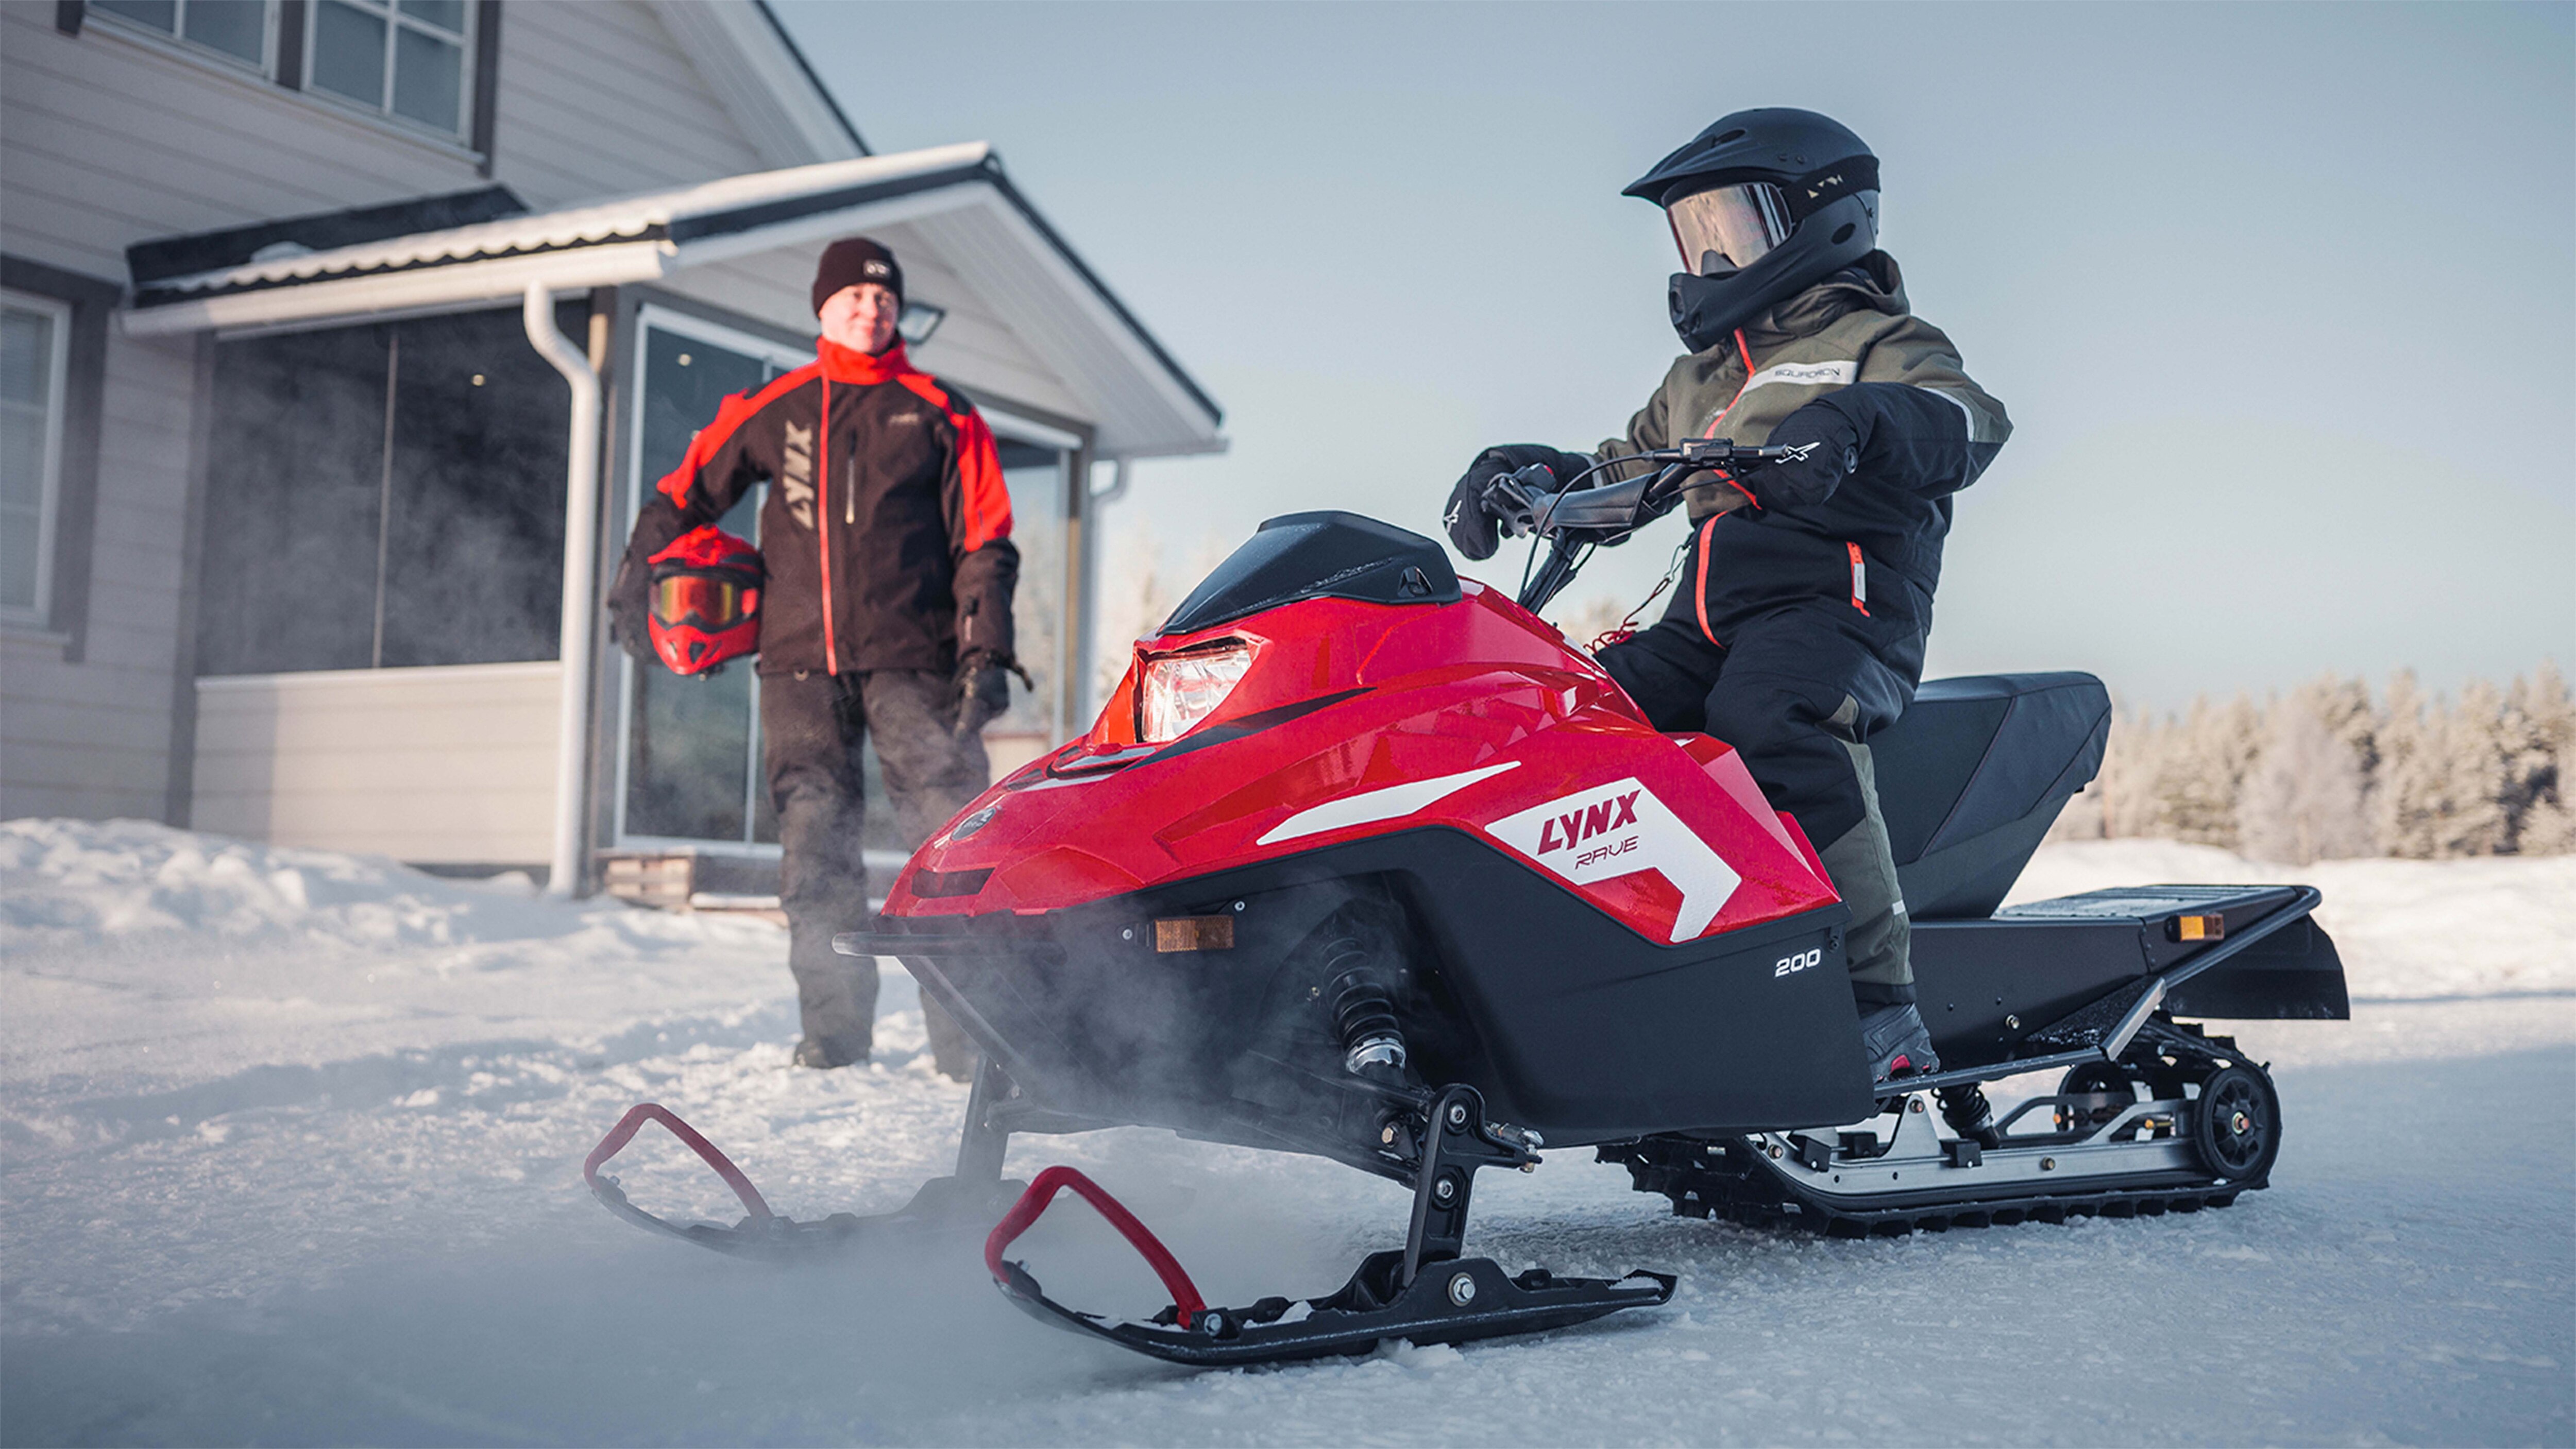 Lynx Rave 200 snowmobile with a kid on the yard